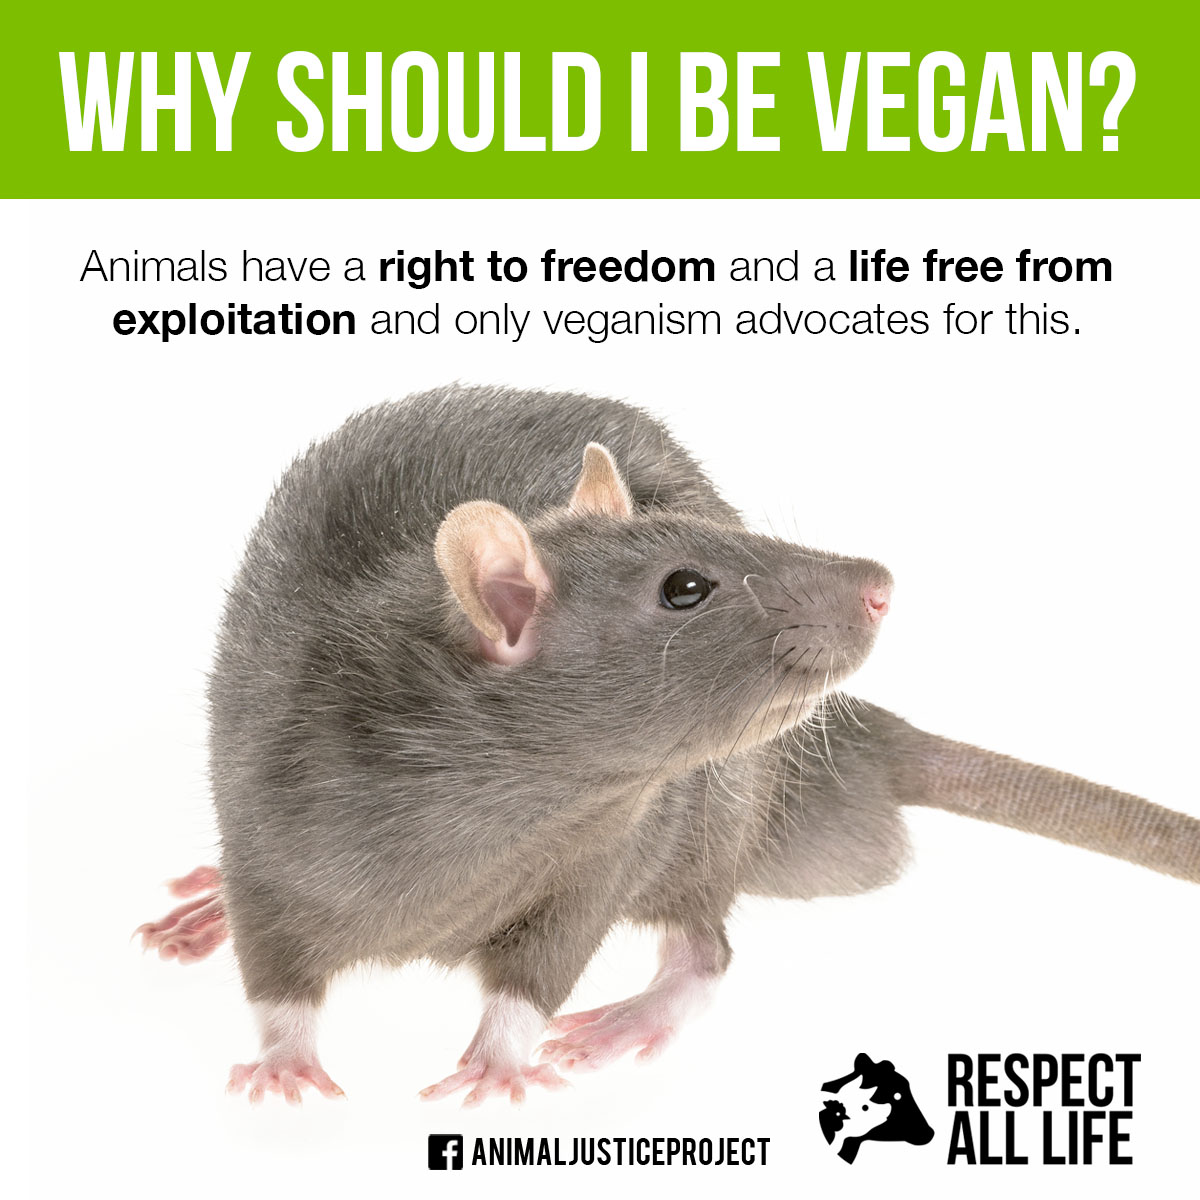 Why should I be vegan?

Animals have a right to freedom and a life free from exploitation and only veganism advocates for this.

animaljusticeproject.com
#WorldVeganMonth #AnimalRights #AnimalJustice #NonHumanPerson #SomeoneNotSomething #AnimalJusticeProject #EthicsOverHabits